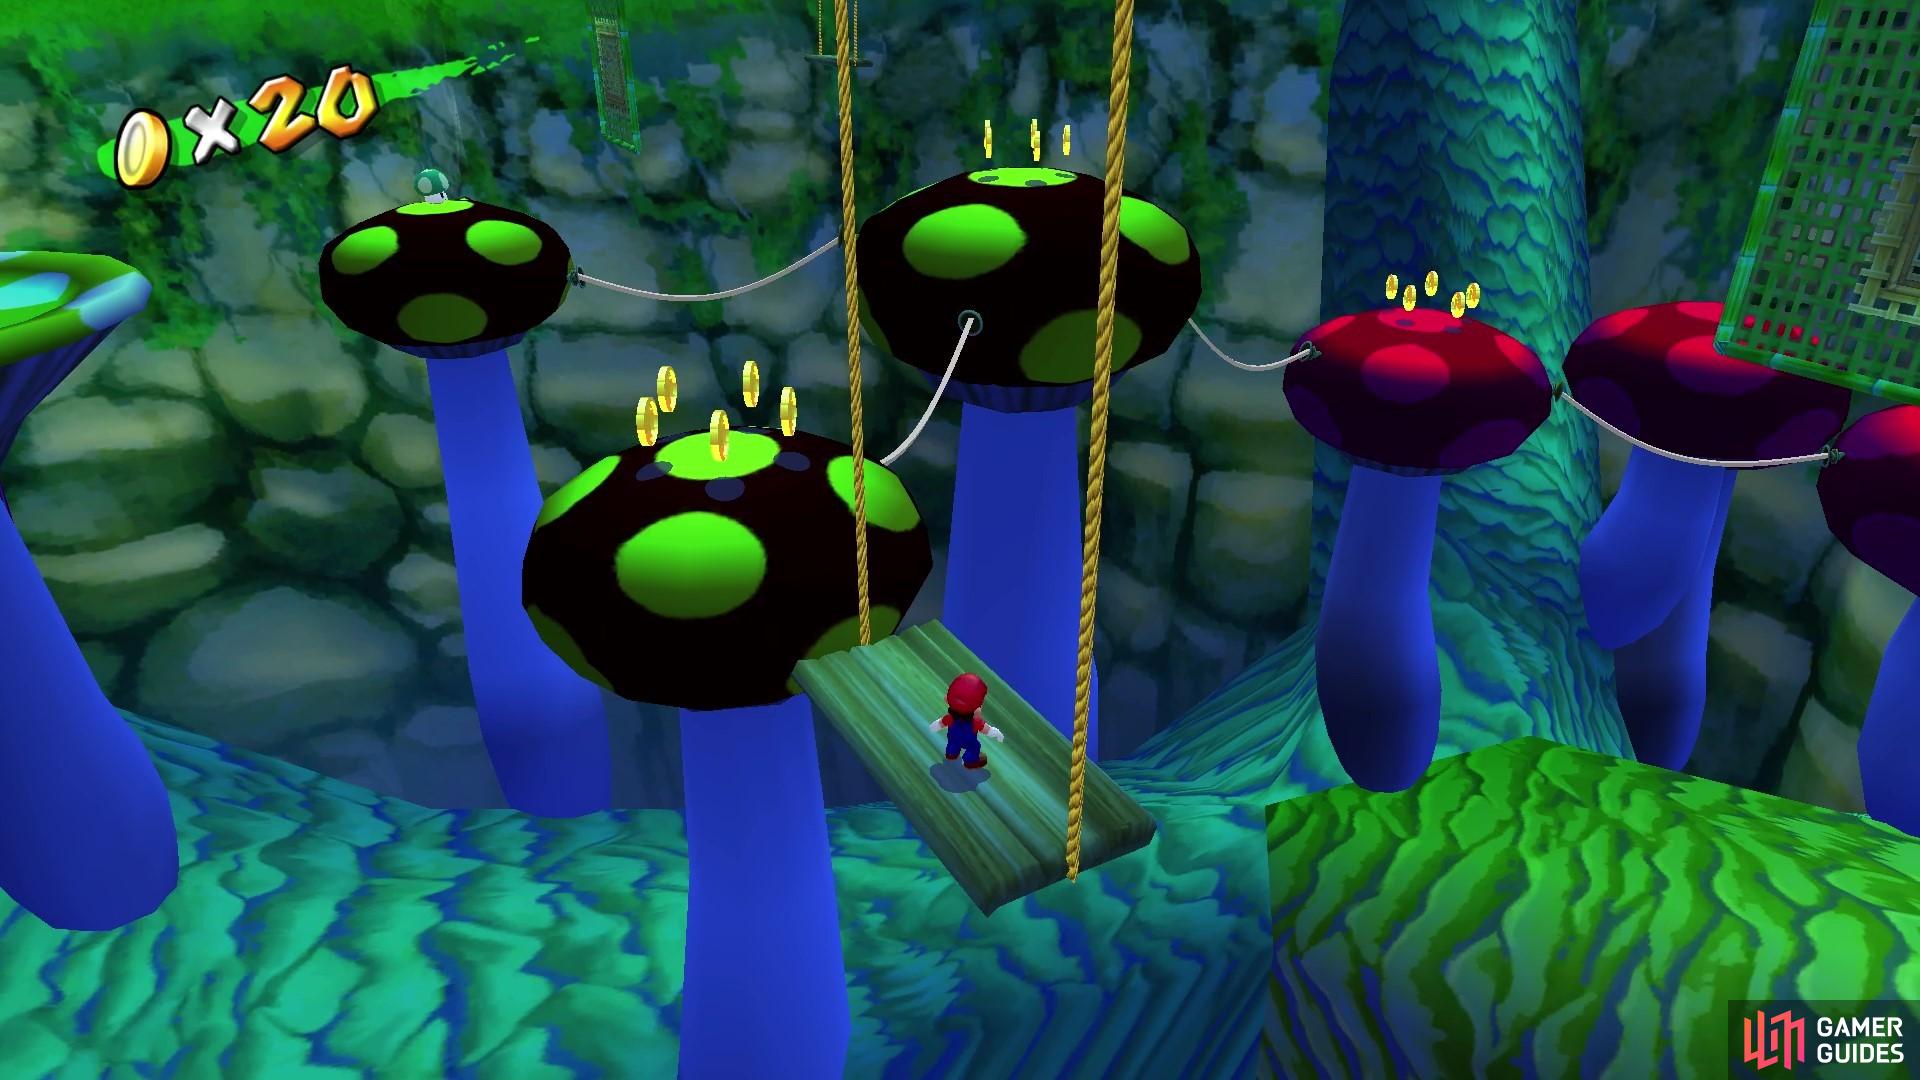 You'll need to jump across the toadstools using the ropes